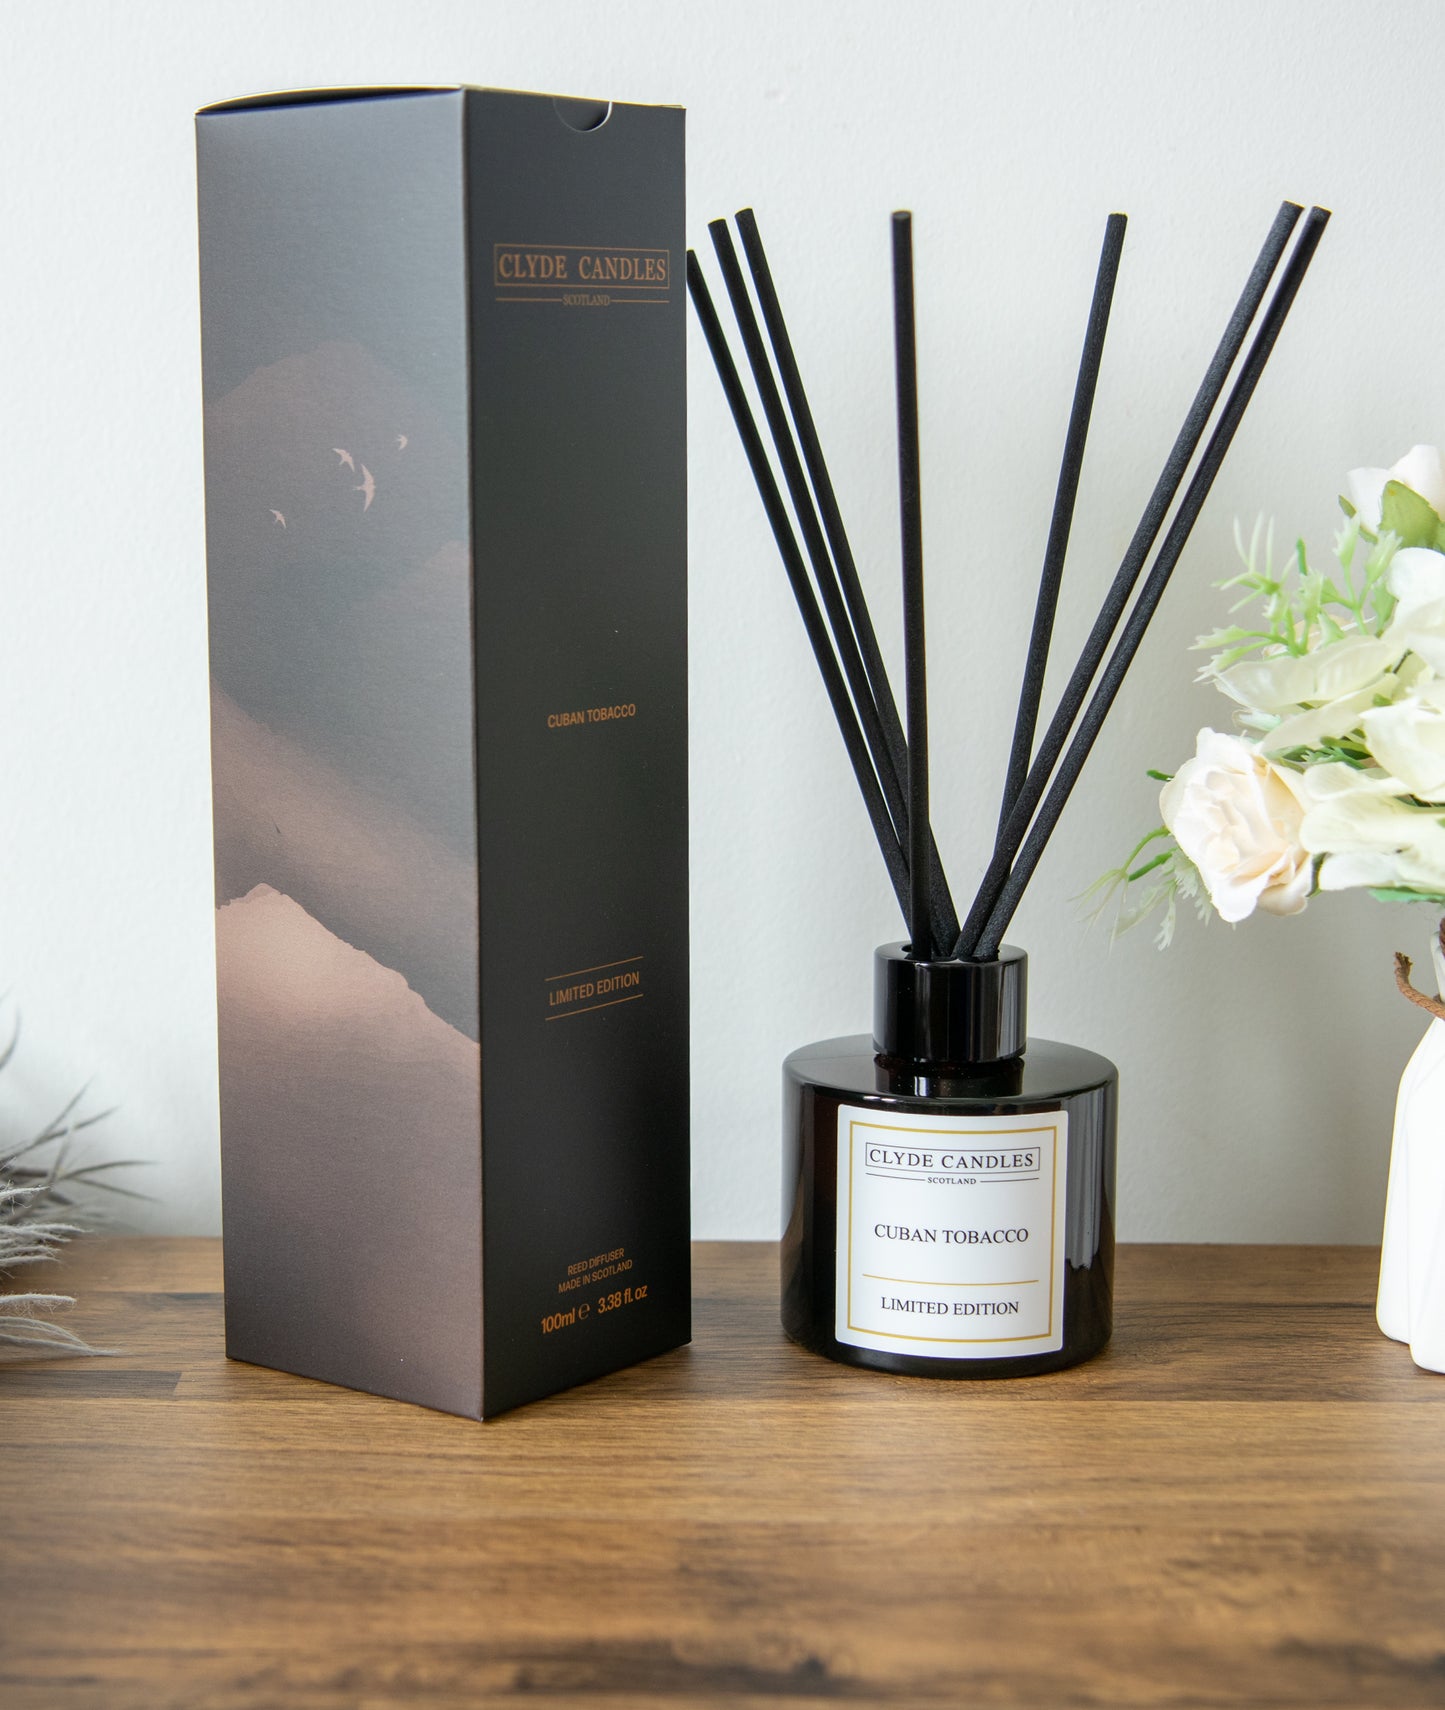 Cuban Tobacco Reed Diffuser - Clyde Candles, Luxury Diffuser Oil with a Set of 7 Fibre Sticks, 100ml, Best Aroma Scent for Home, Kitchen, Living Room, Bathroom, Office. Fragrance Diffusers set with sticks